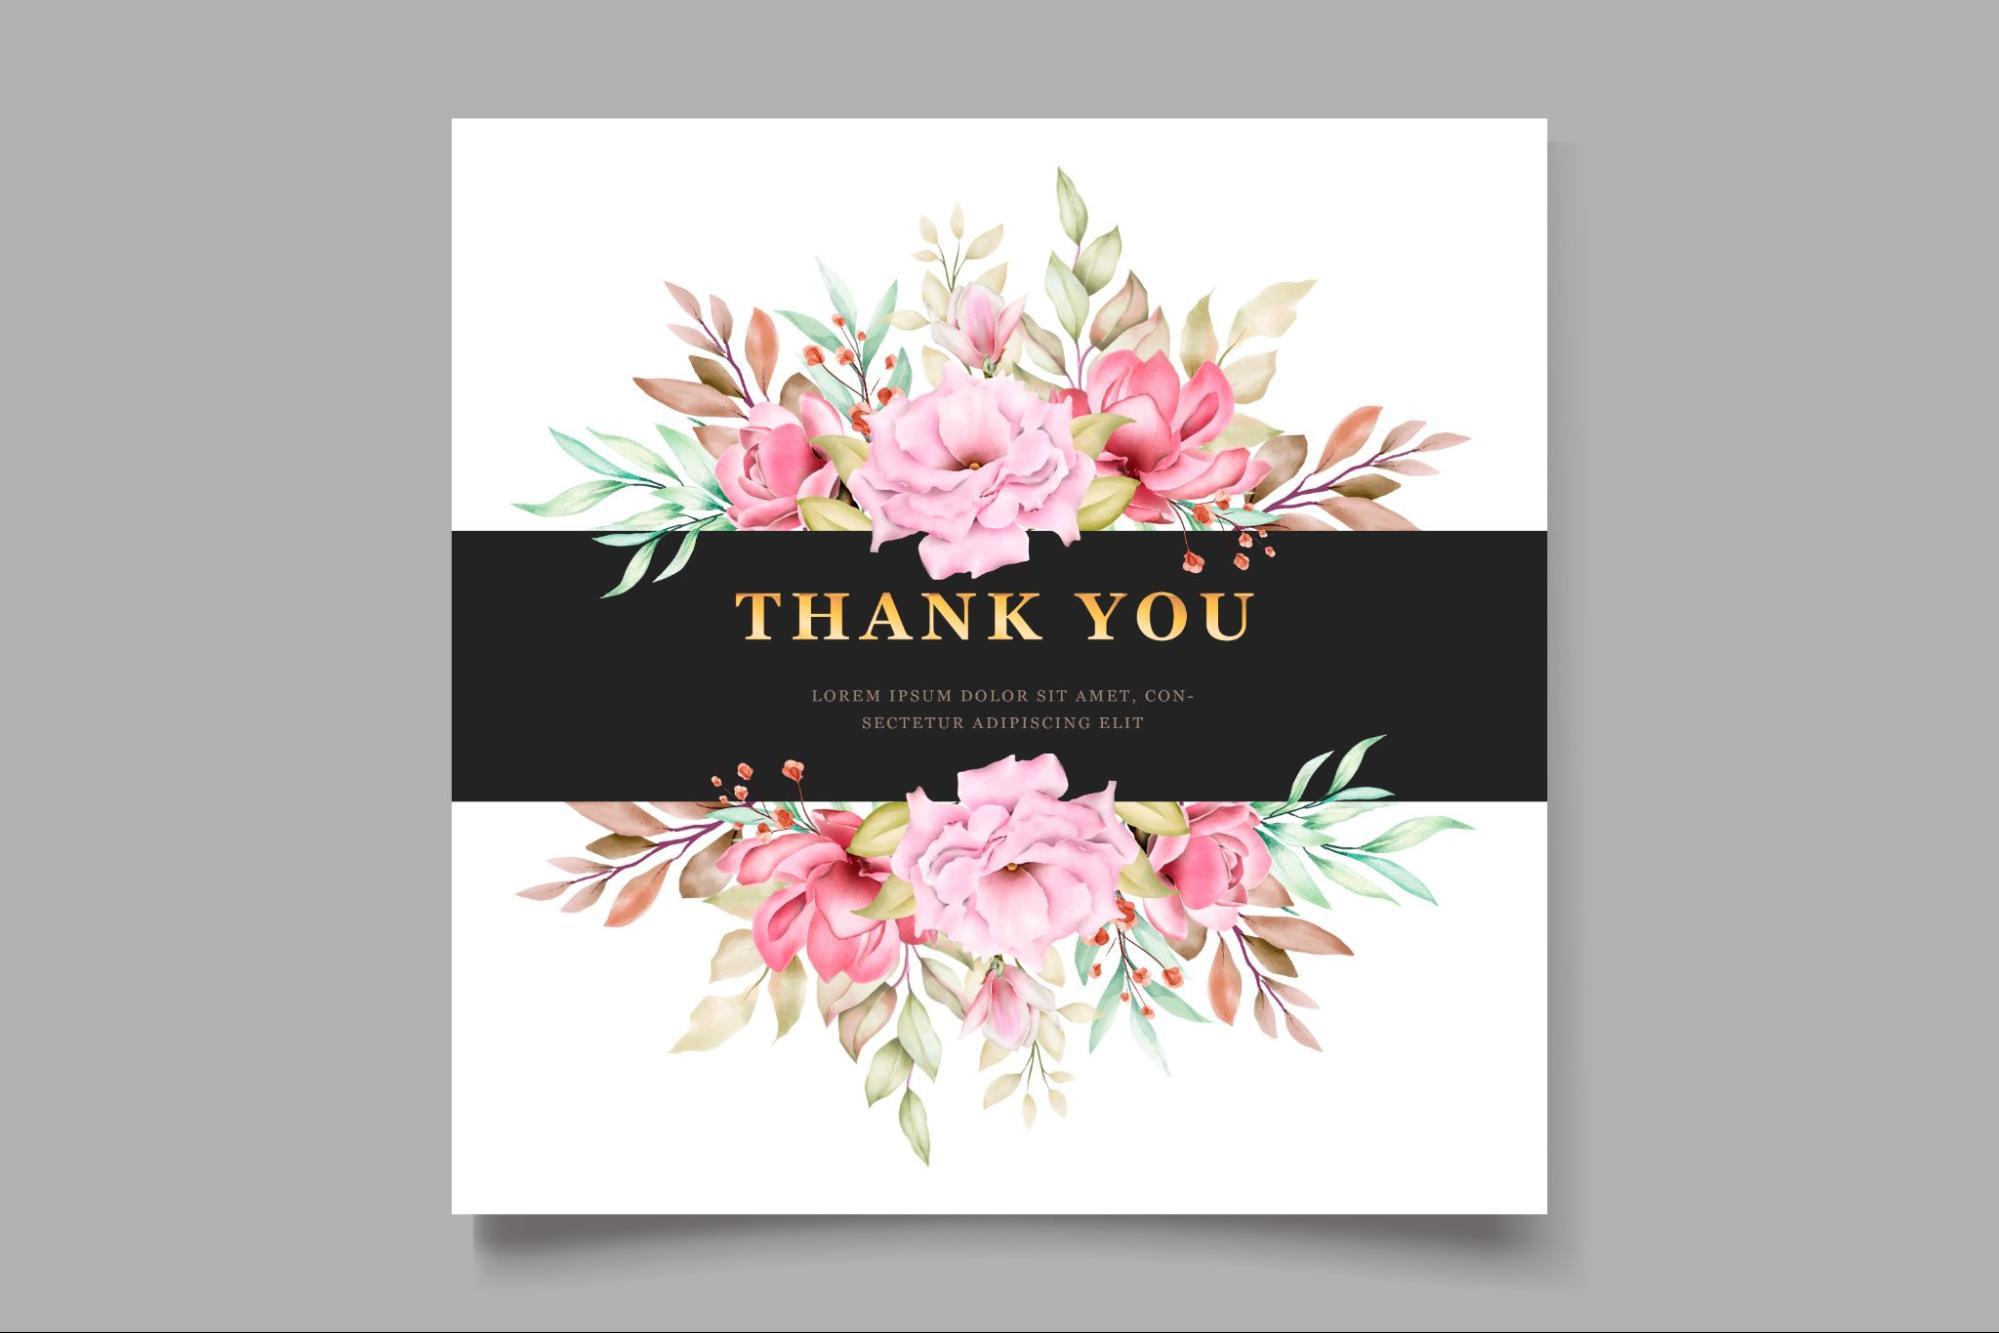 Floral Thank You Card Design, perfect as a Birthday Return Gift Idea